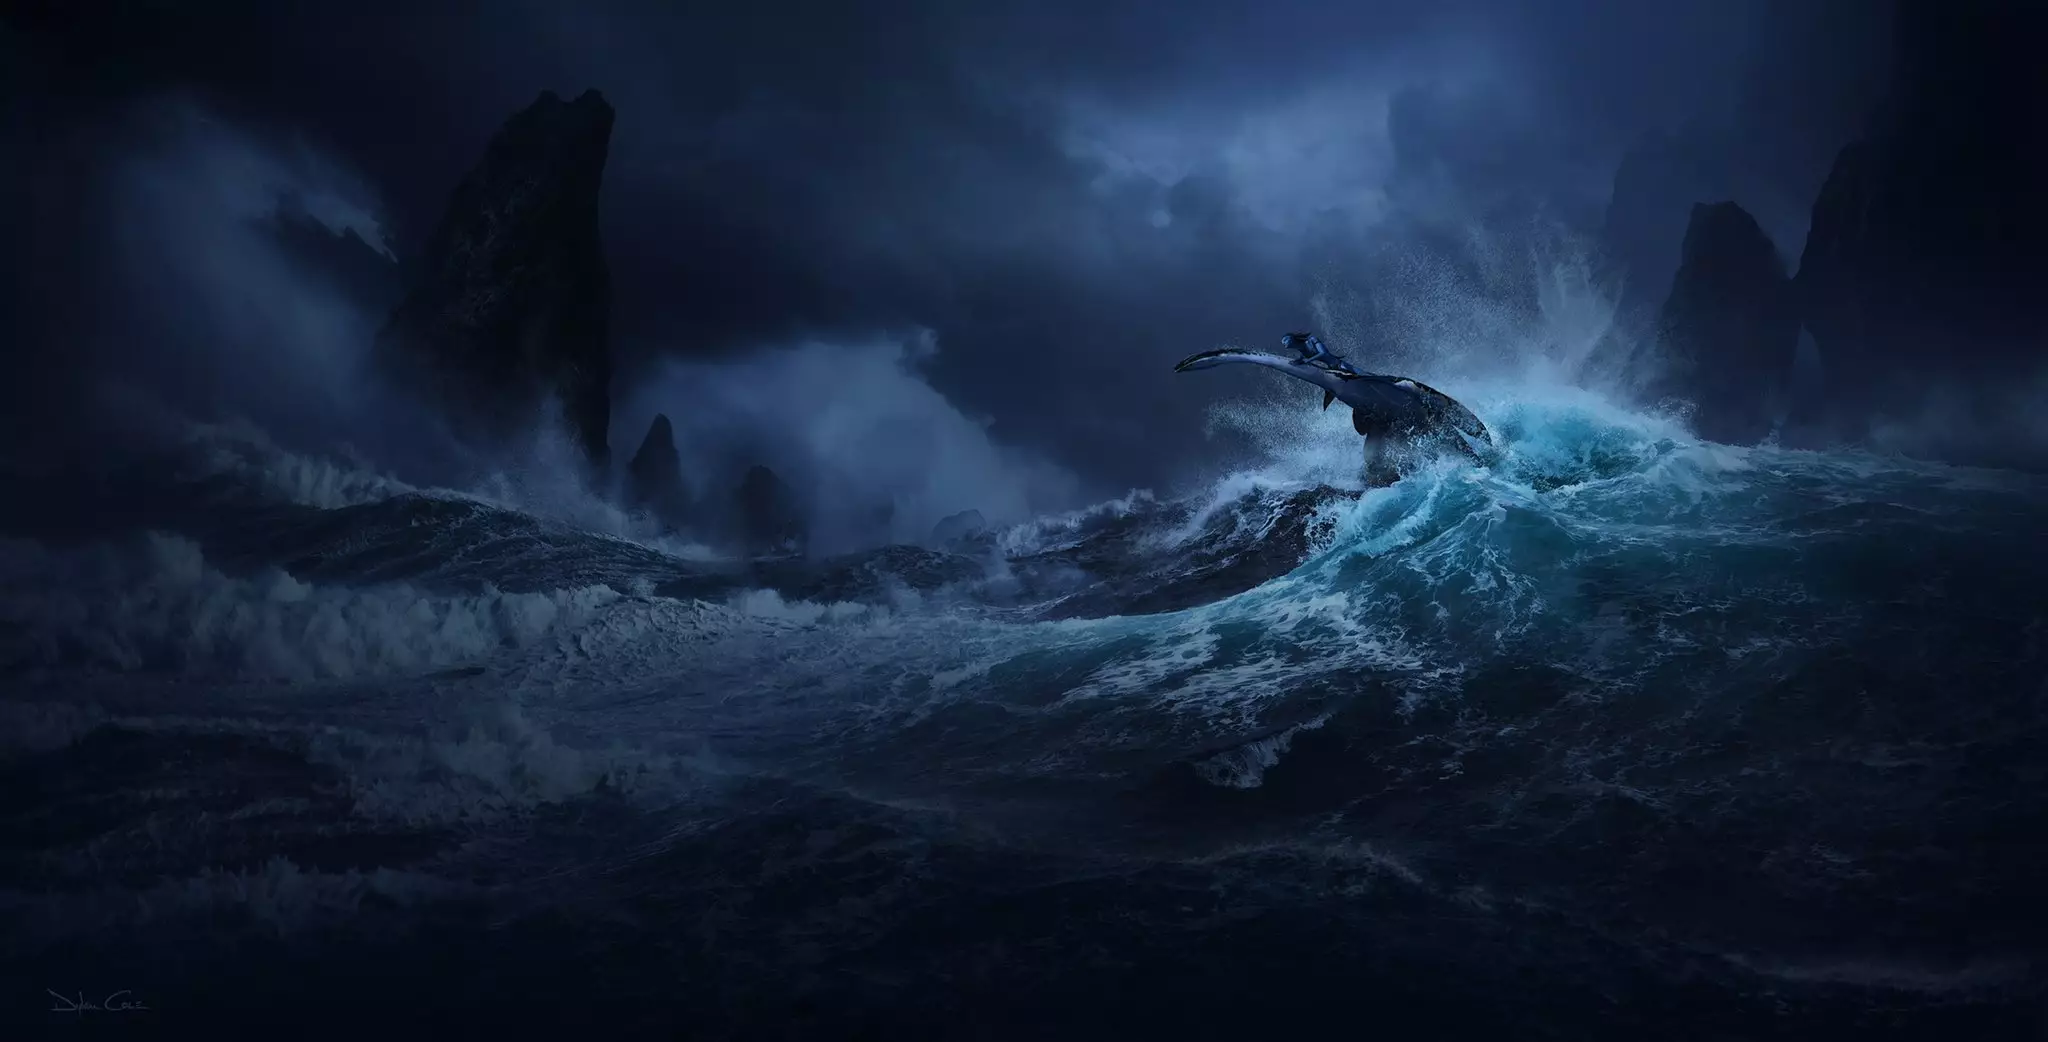 A lot of Avatar 2 will be set in an underwater setting.